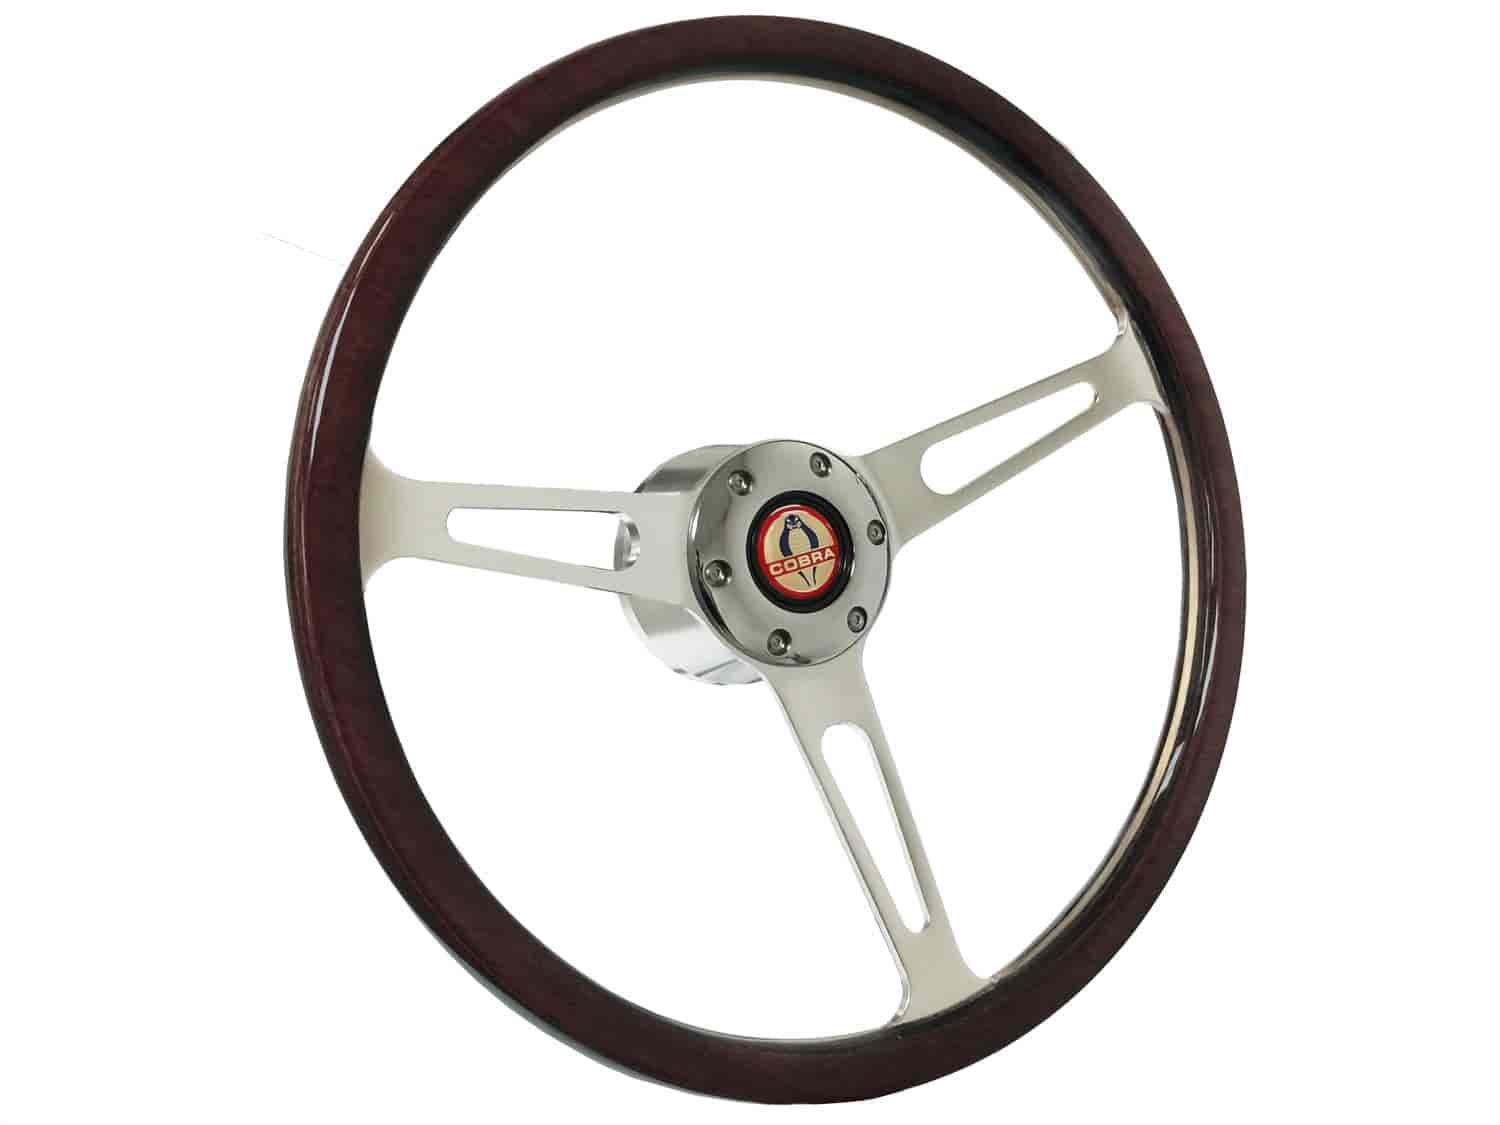 S6 Classic Steering Wheel Kit 1964-72 Ford/Mercury, 15 in. Diameter, Deluxe Espresso Wood Grip, w/ 6-Bolt Adapter & Horn Button